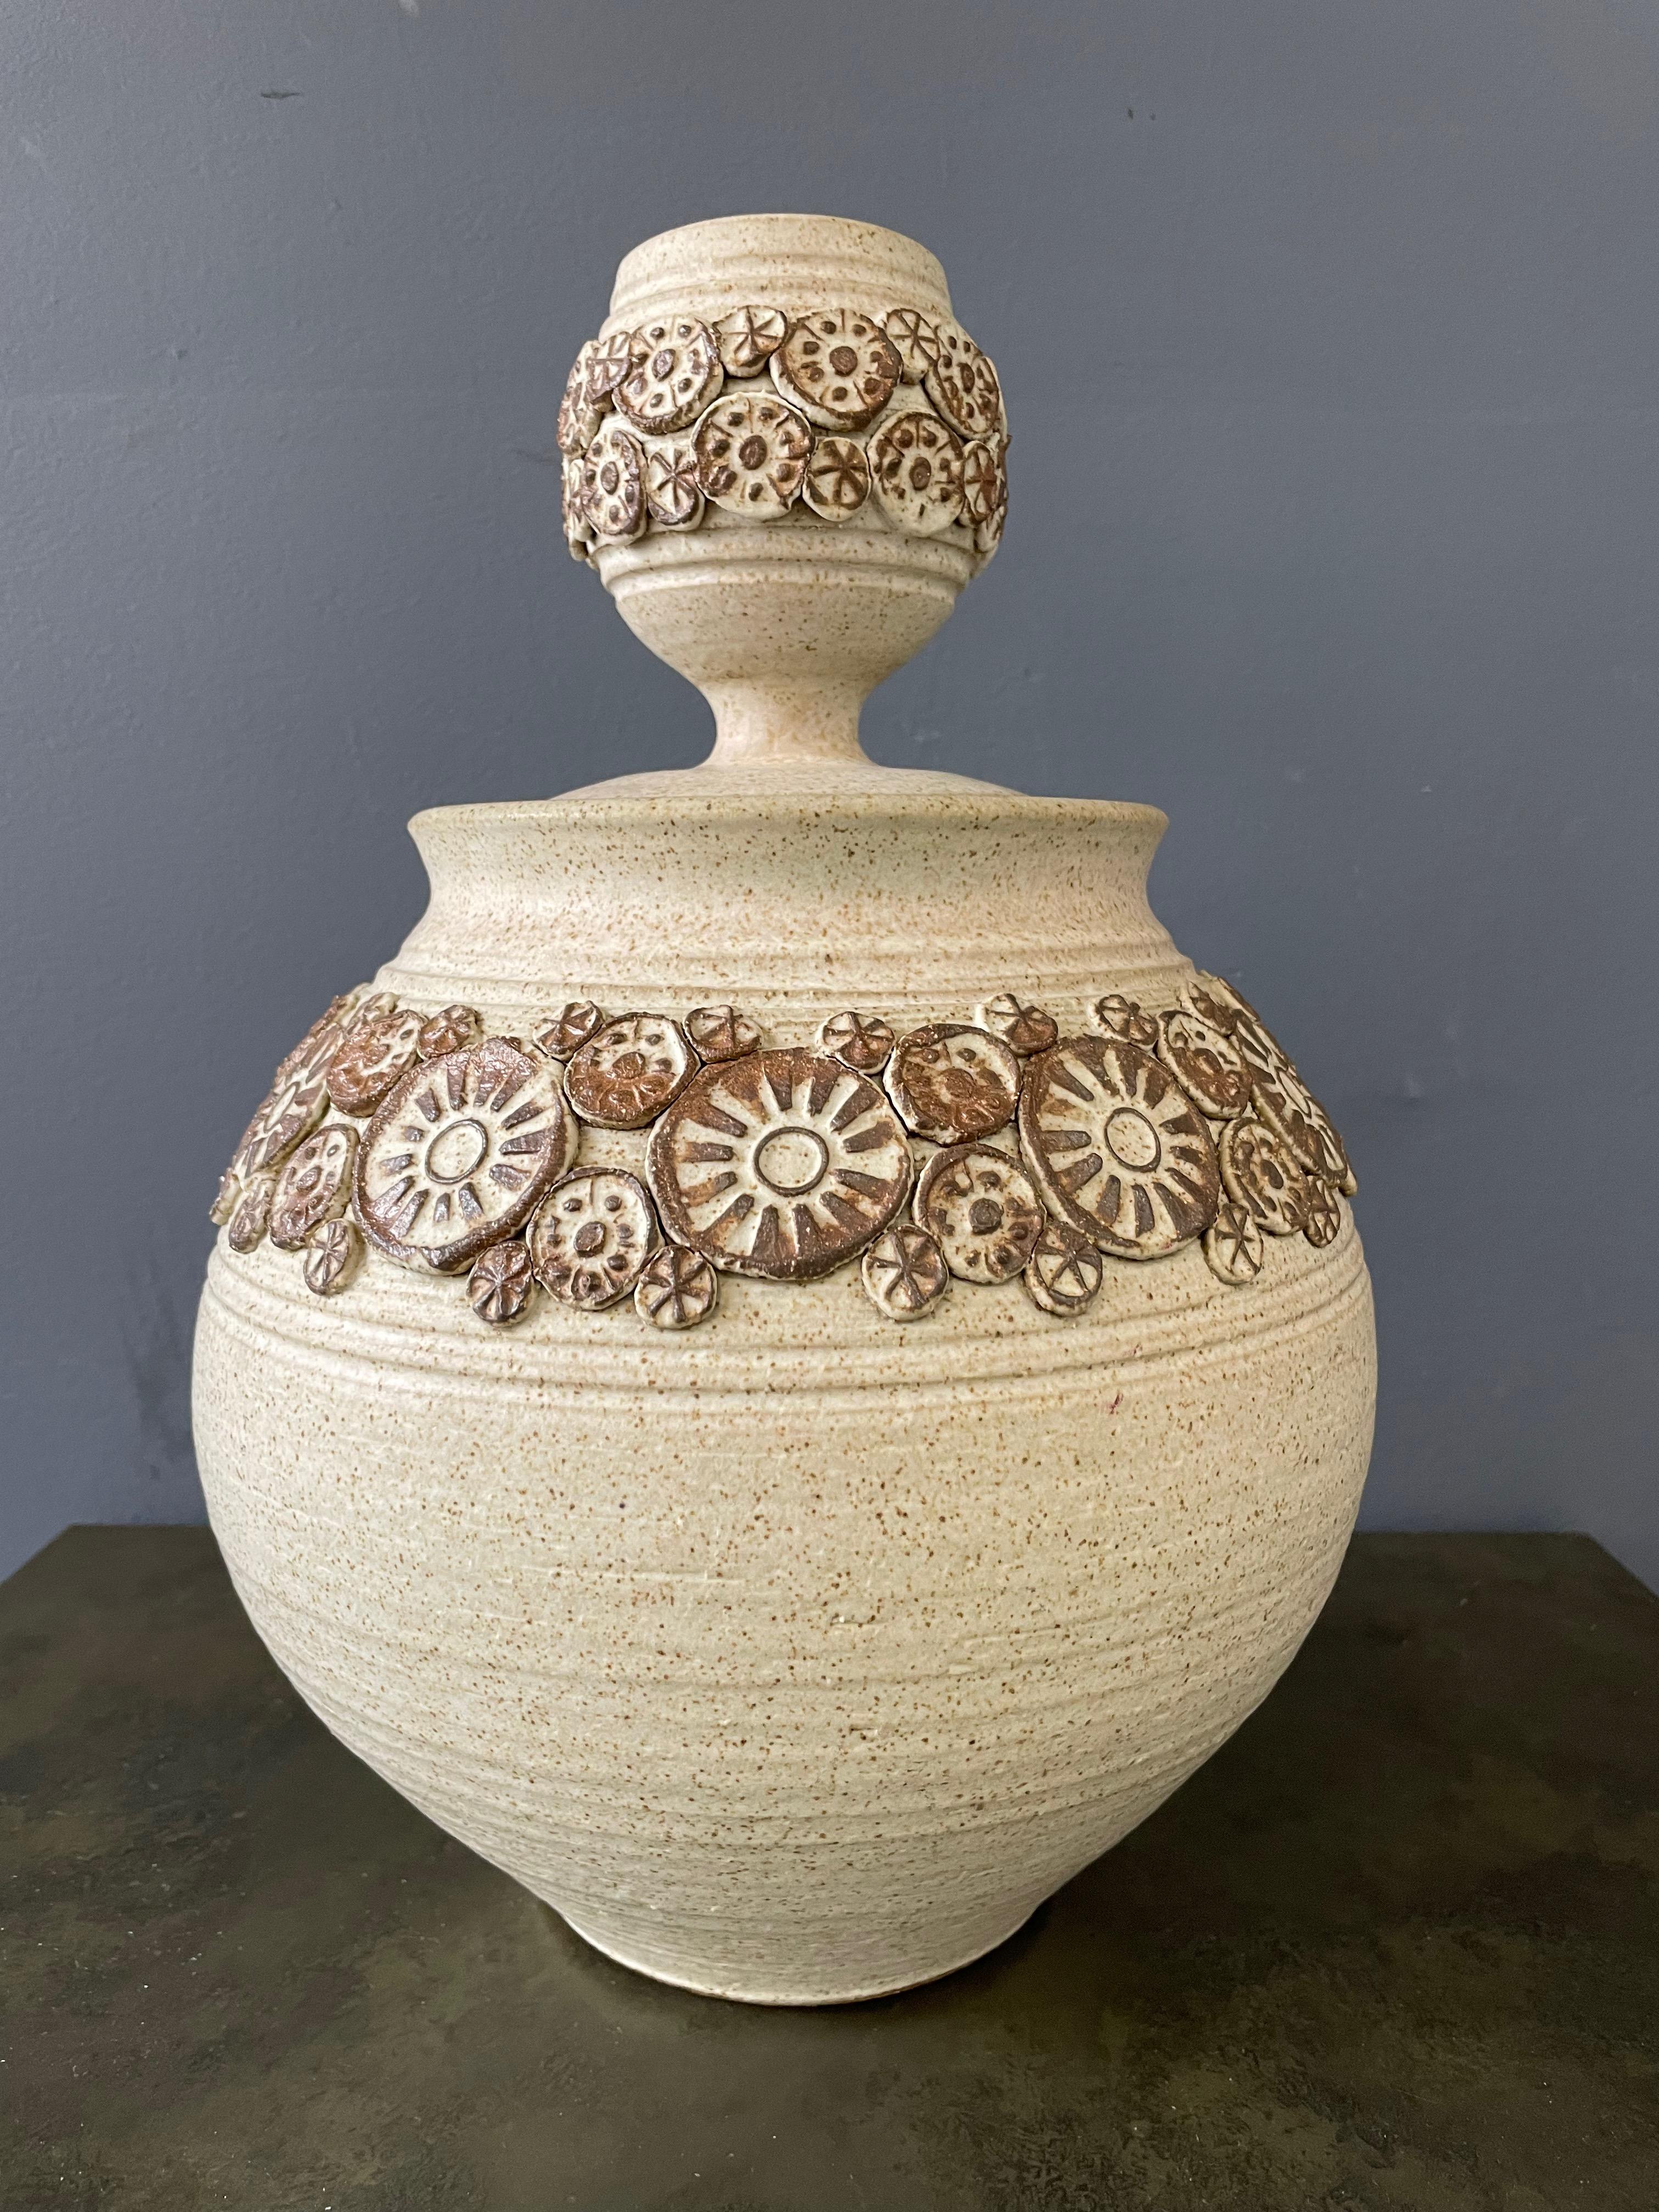 Vessel is instantly recognizable as the work of Wishon-Harrell artist Frank Wilett. The circular appliqué pieces are instantly a giveaway. The lid is an unusual shape that mimics the base and makes this piece incredible.